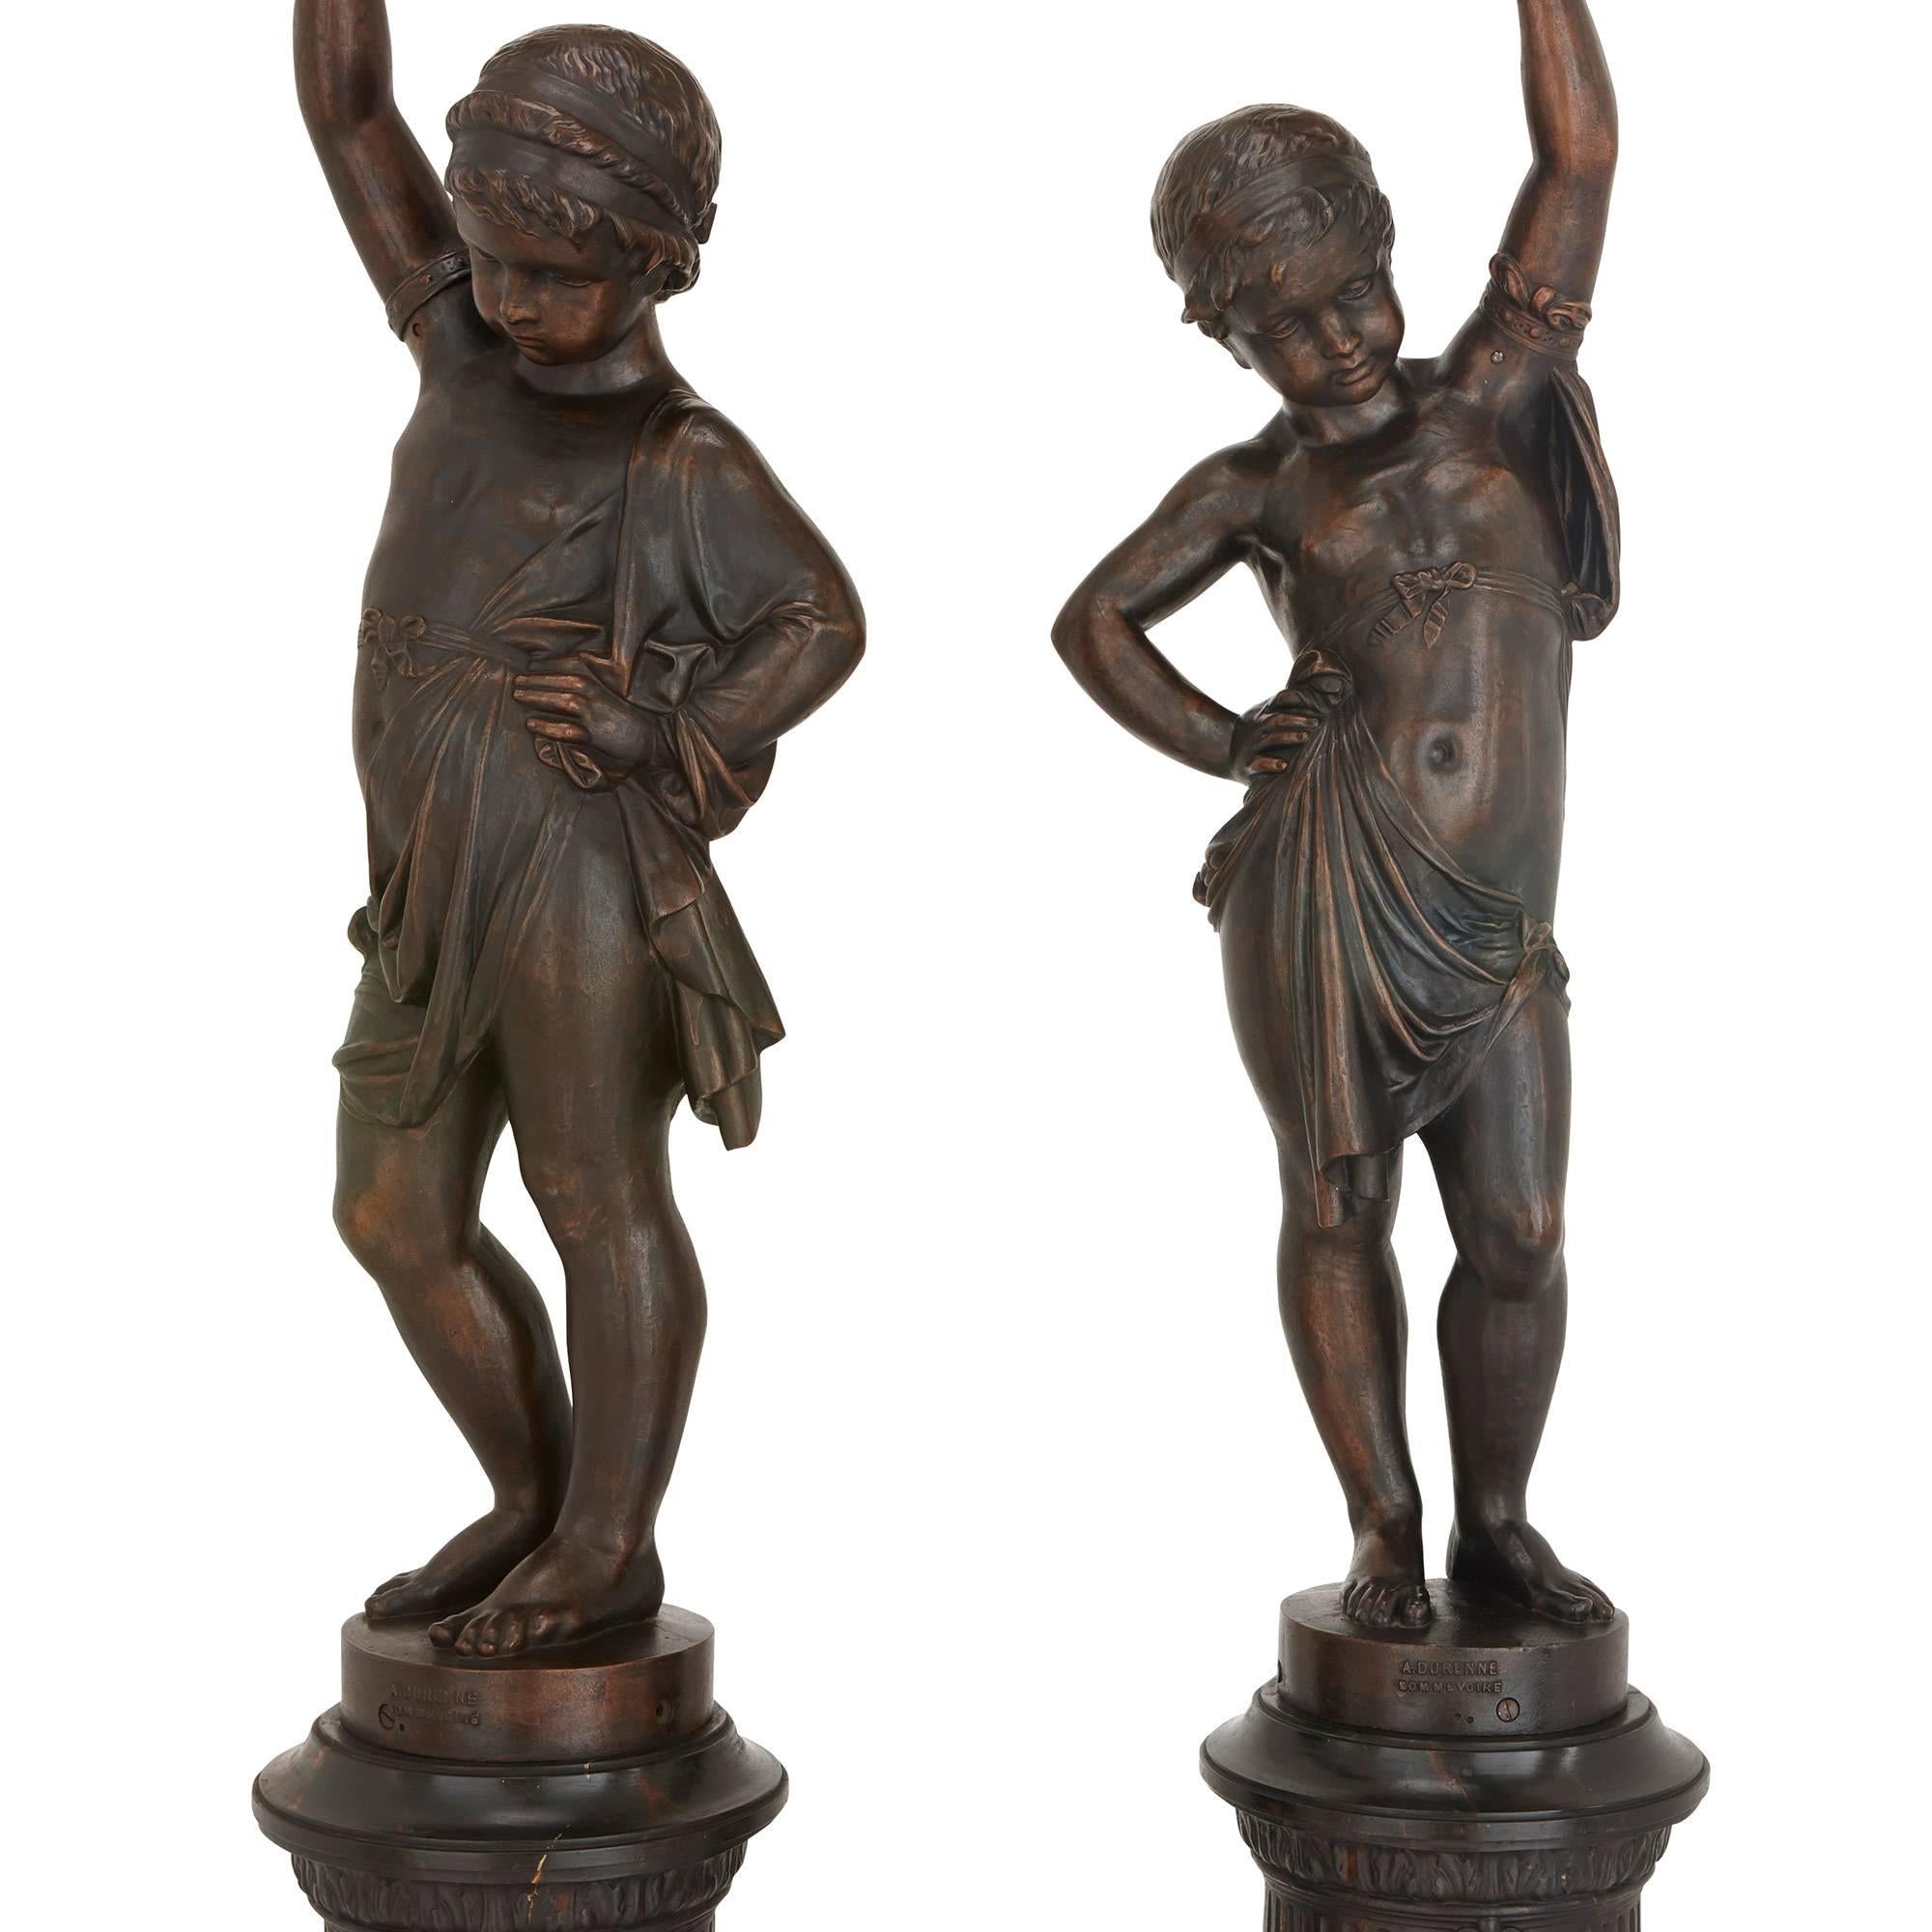 Each depicting a young male figure holding aloft a torch, on a pair of faux marble pedestals decorated with masks.

The company of A. Durenne, maître de forges, was established in 1847 by Antoine Durenne at Sommevoire. Their catalogues of 1877 and